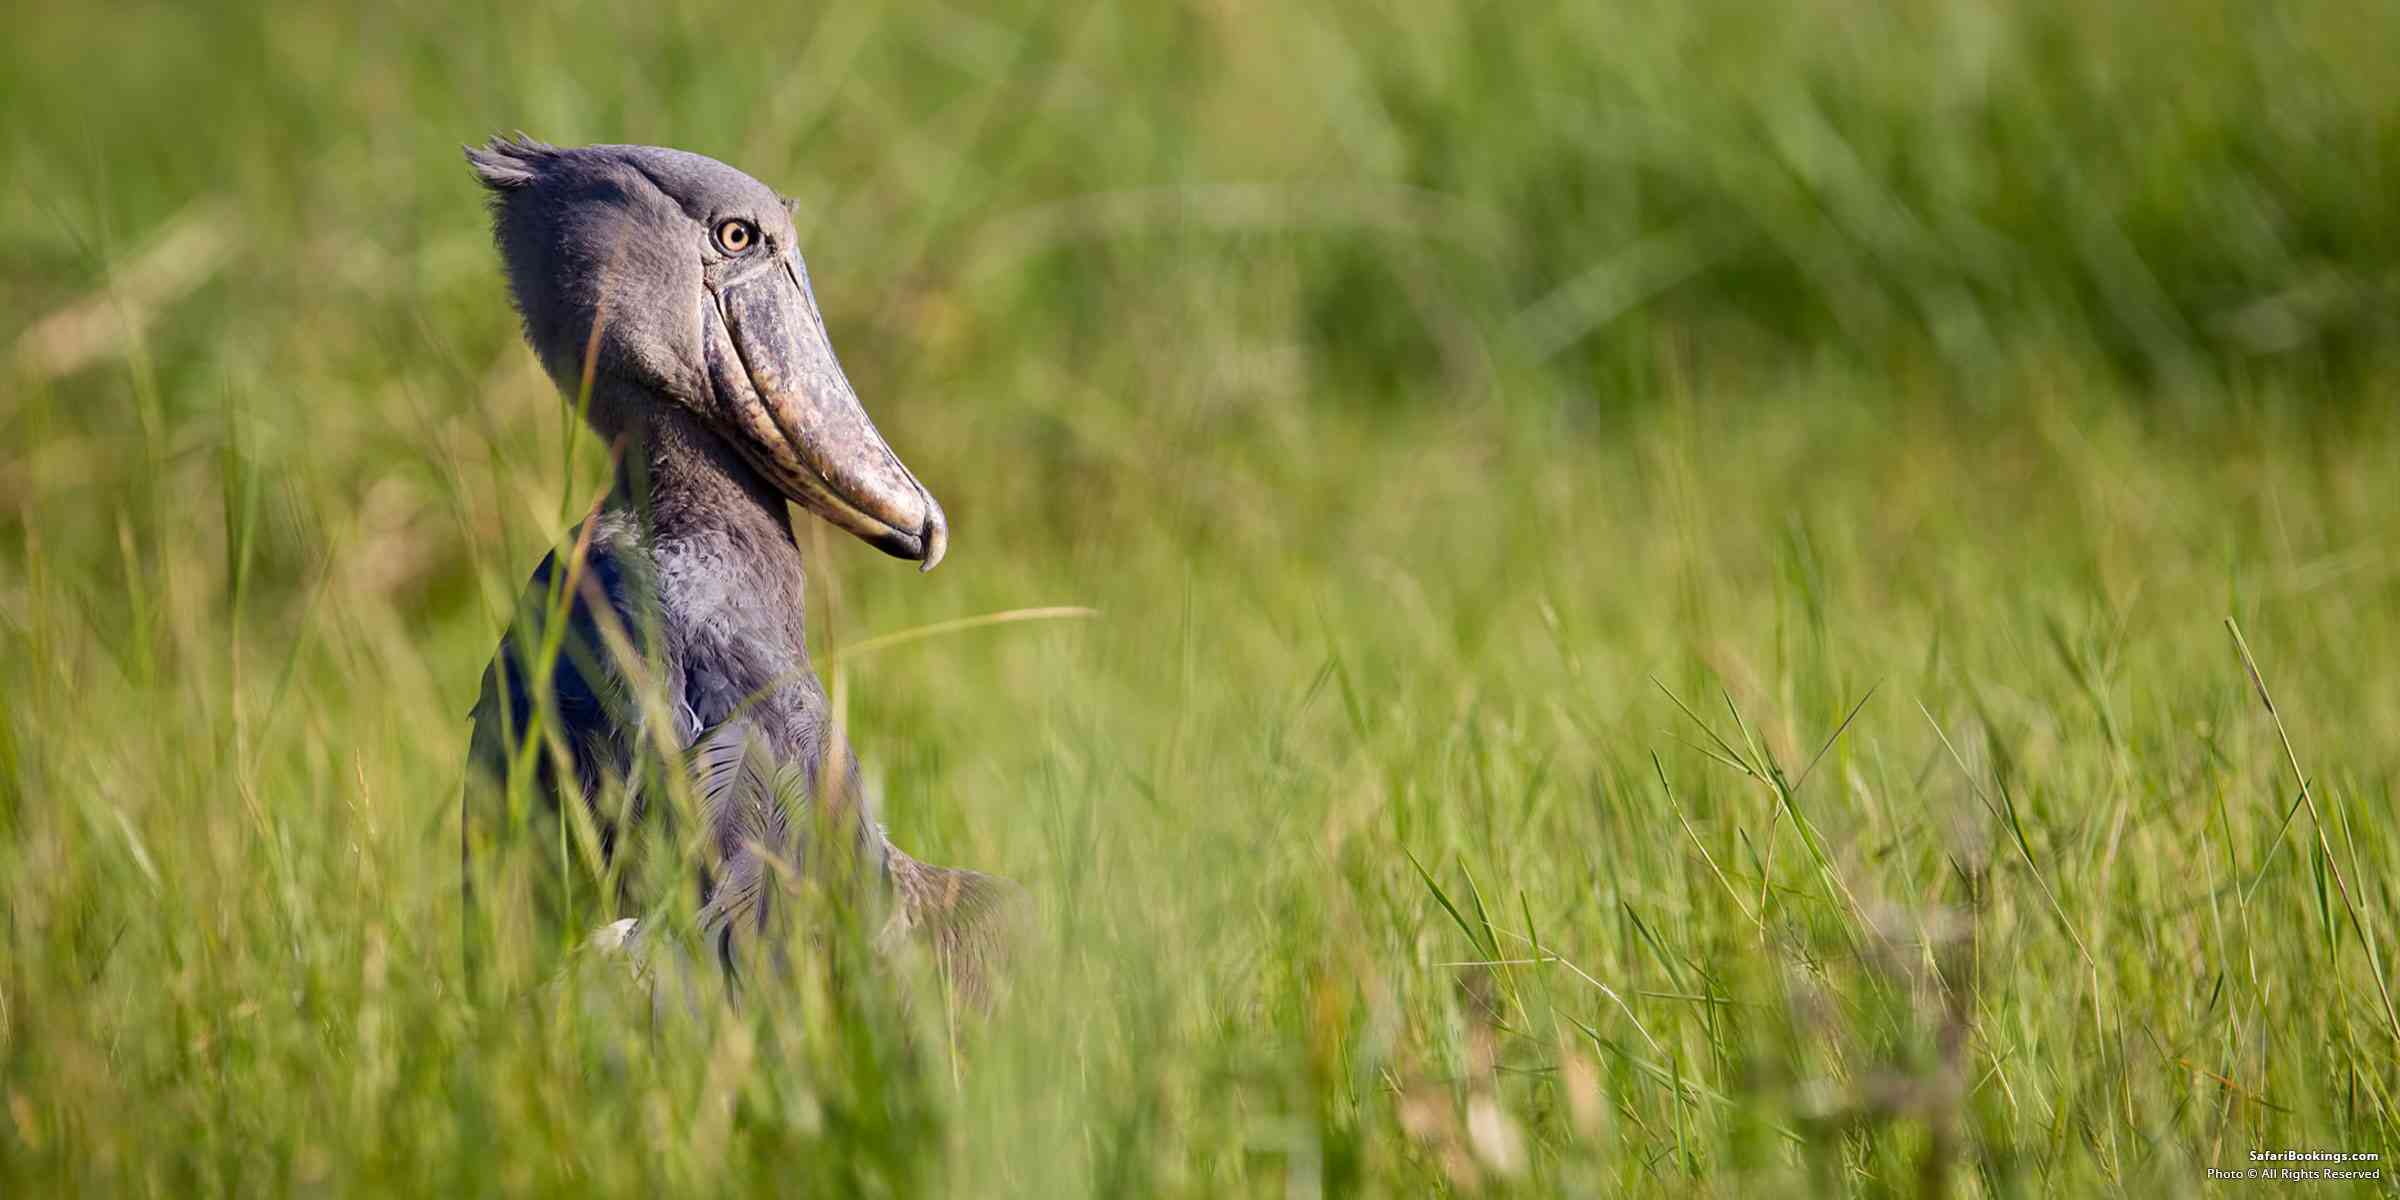 5 Fascinating Facts About the Shoebill